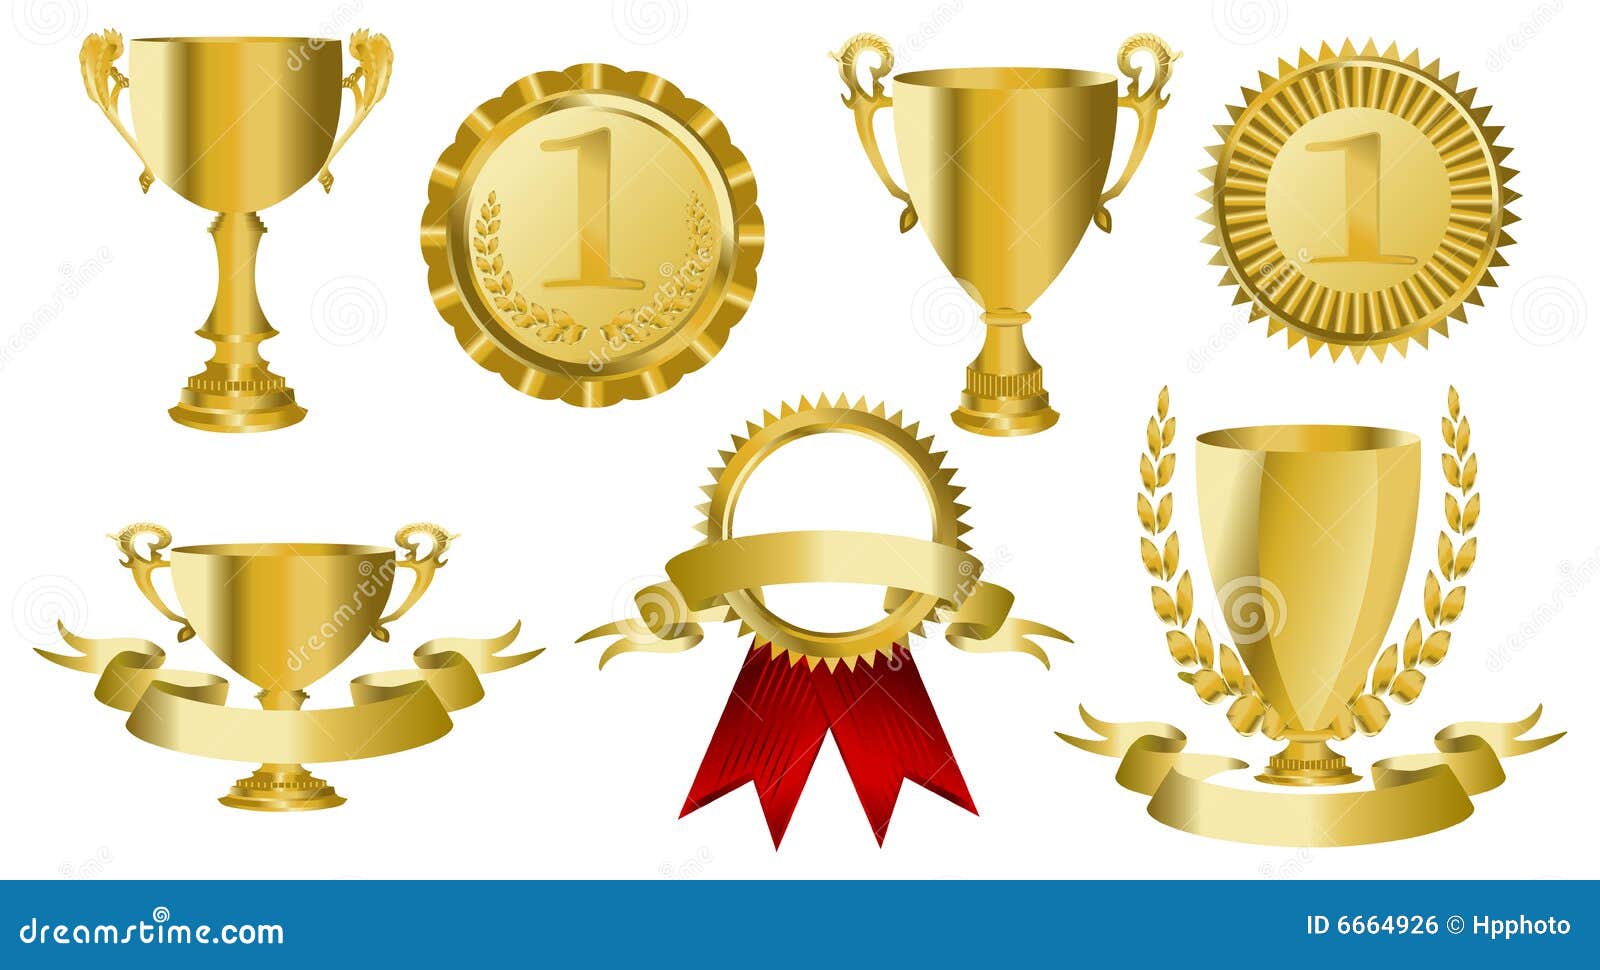 clipart championship medals - photo #47